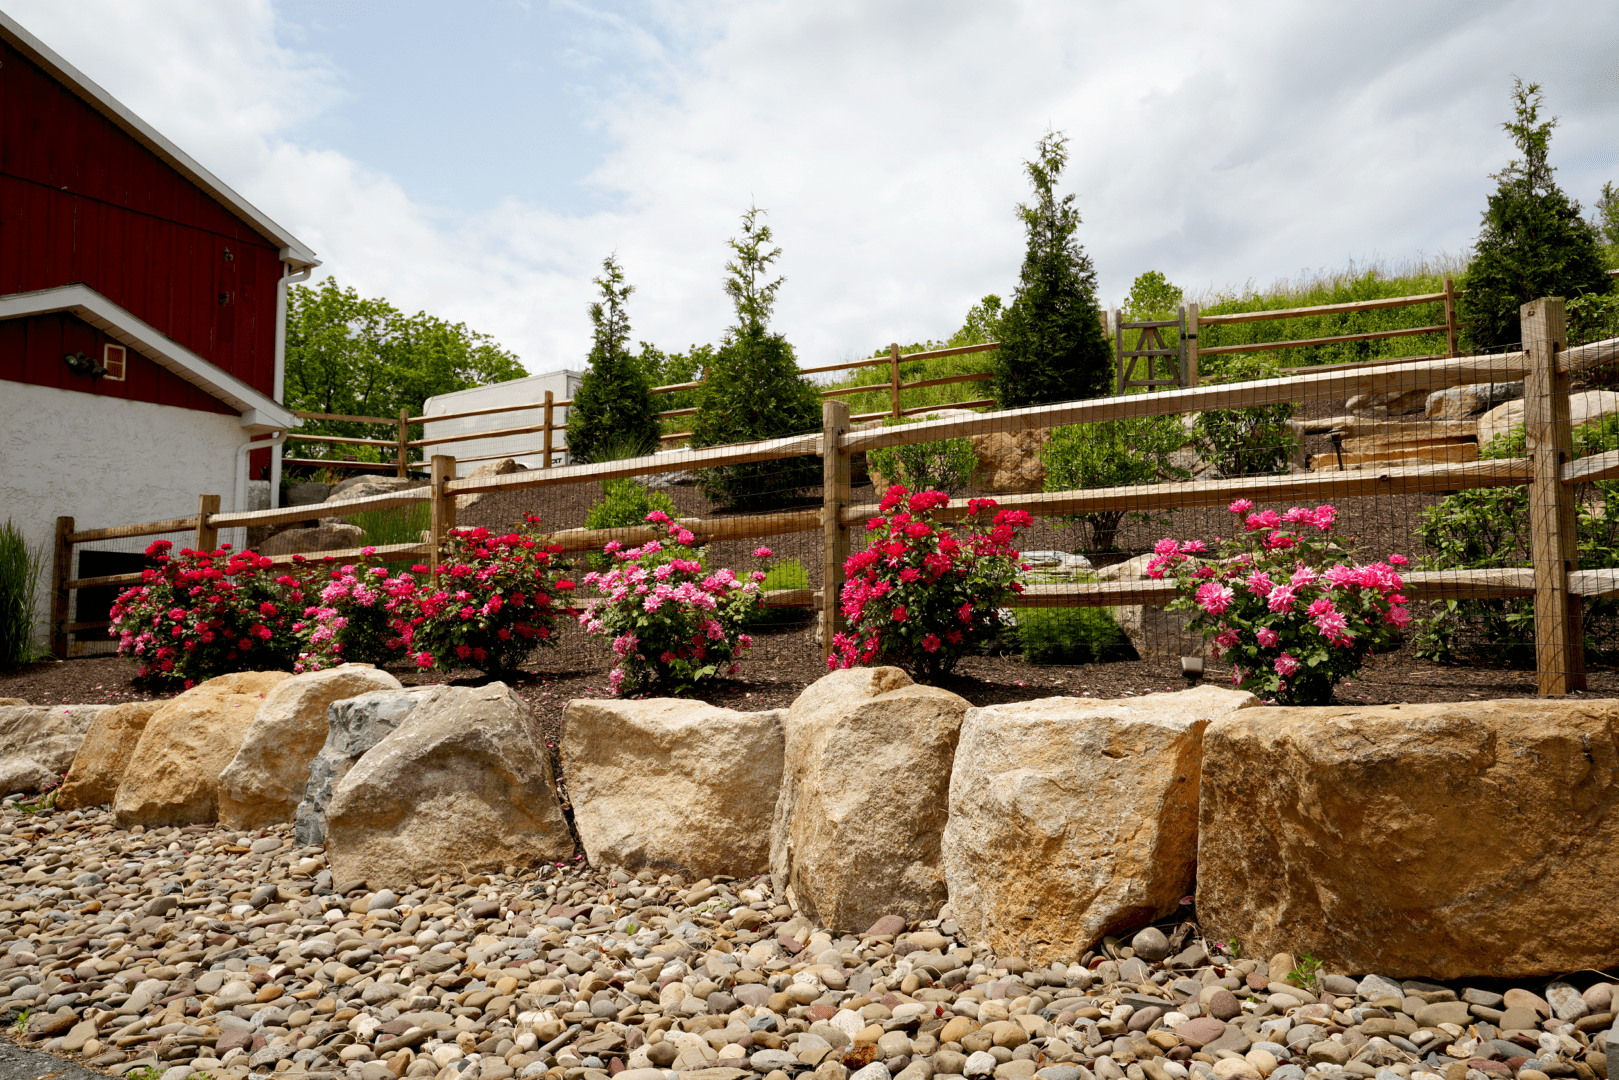 A boulder rock garden with flowers and a fence.